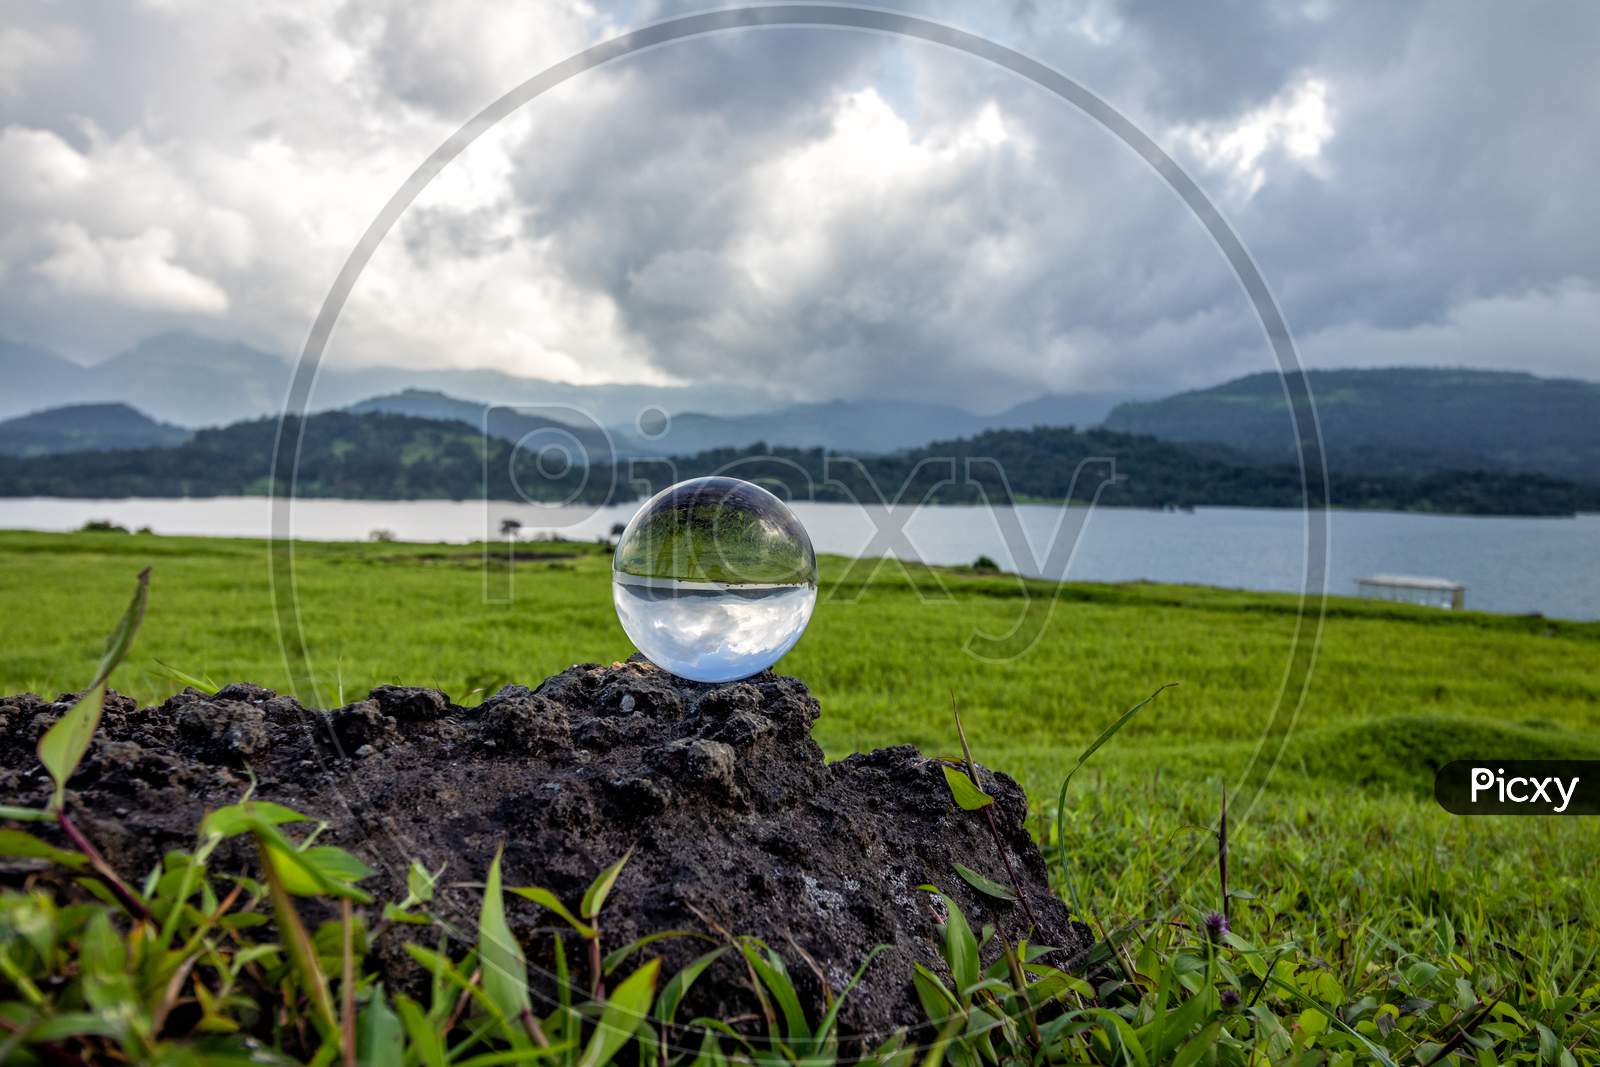 Lens ball Kept On Rock With Lake And Hills In Background Shot At BHANDARDARA